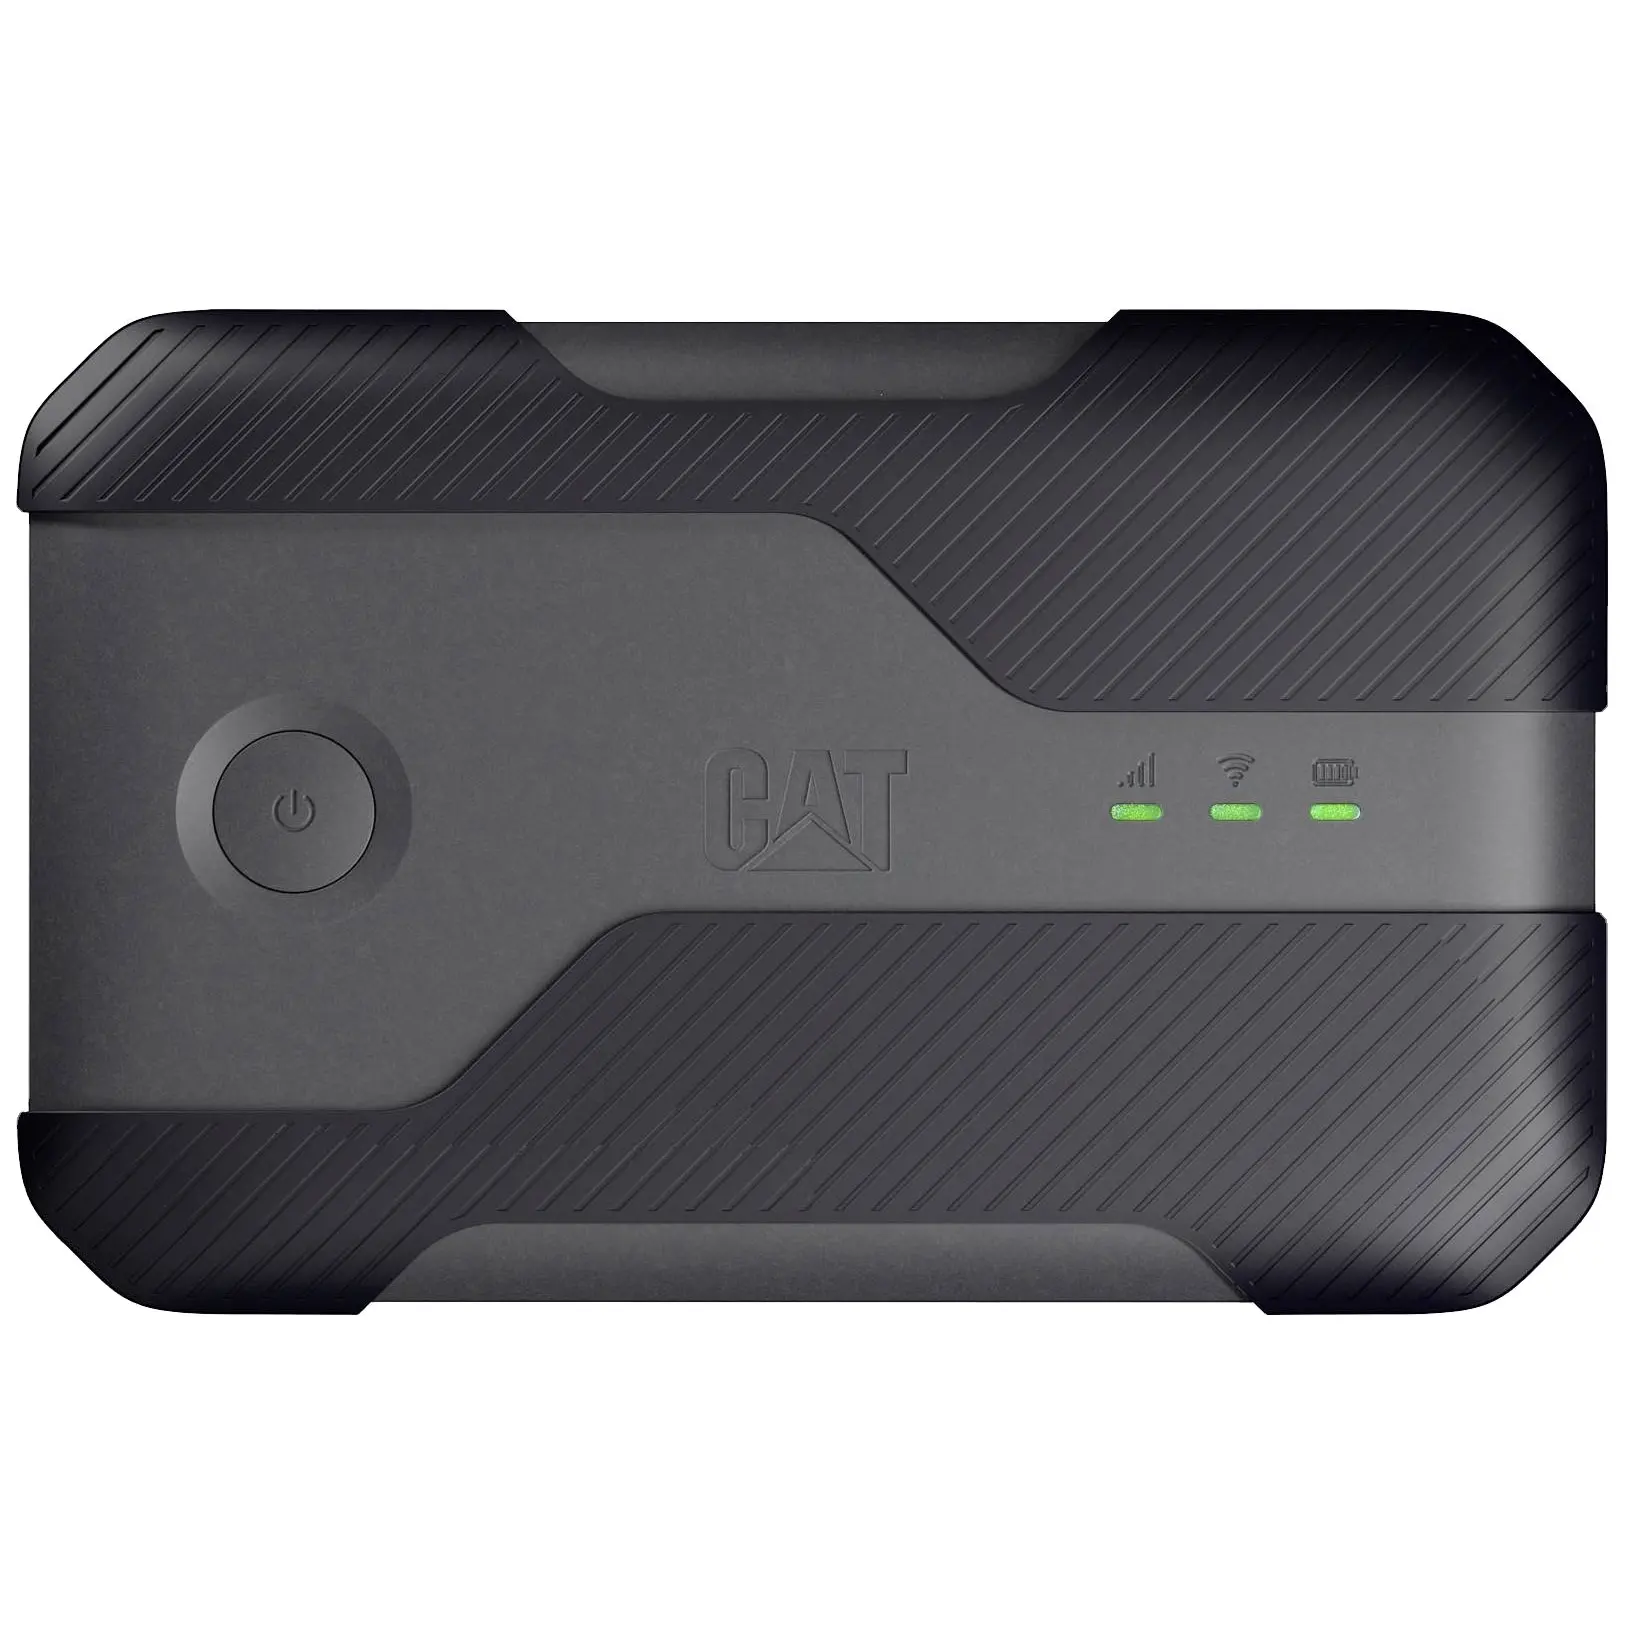 Caterpillar CAT Q10 Robust 5G Outdoor Internet Hotspot, Connect 32 Devices with 5300 mAh Battery ,Drop-Proof, Dust & Waterproof